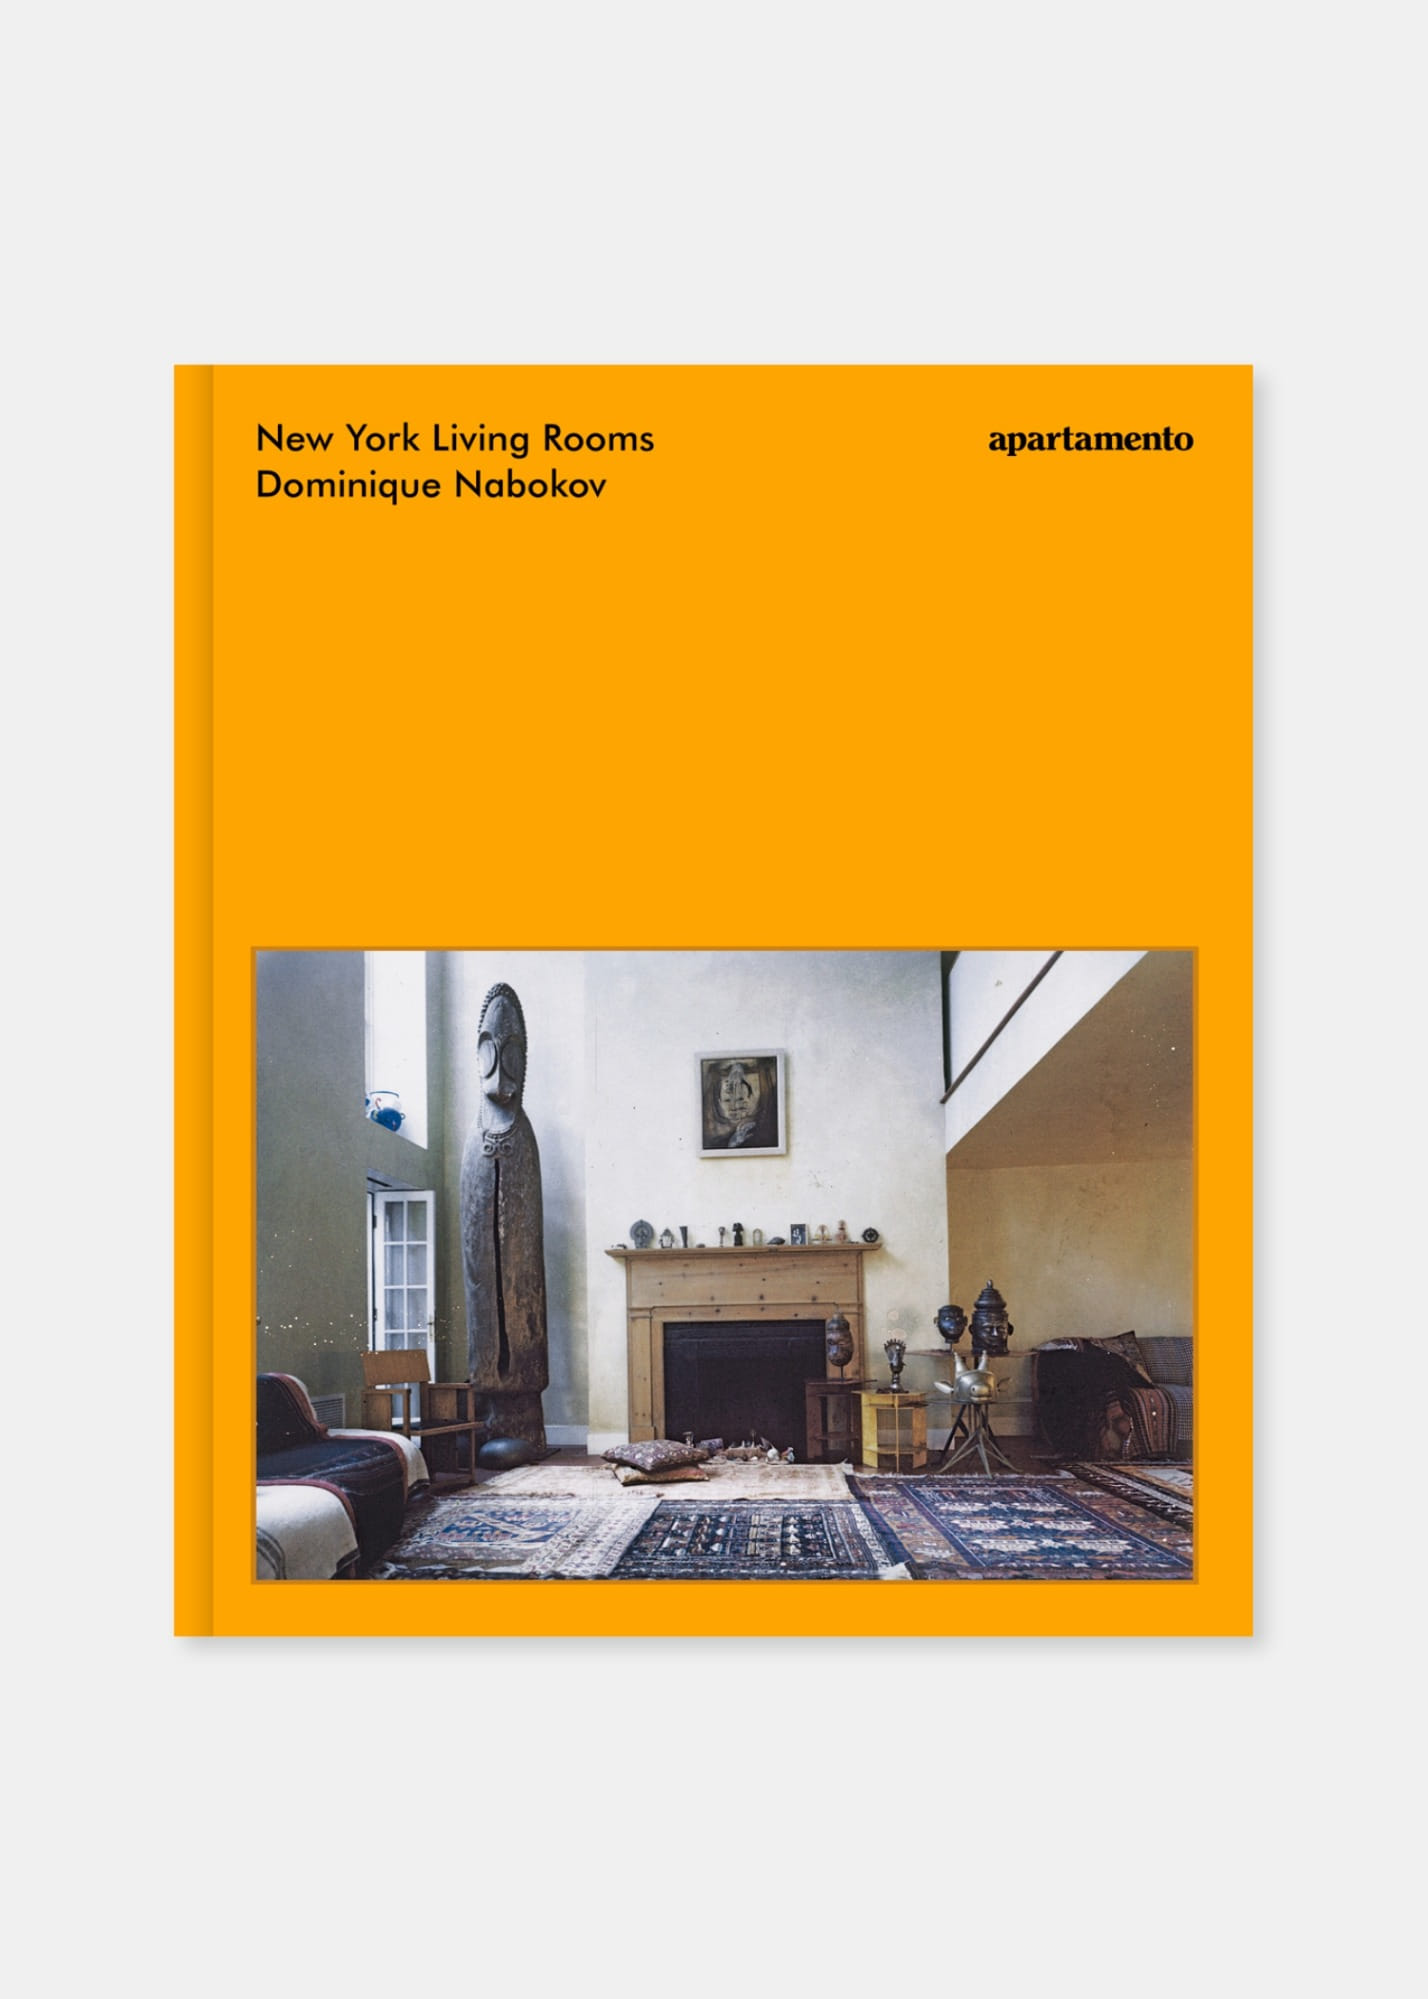 New York Living Rooms, Dominique Nabokov